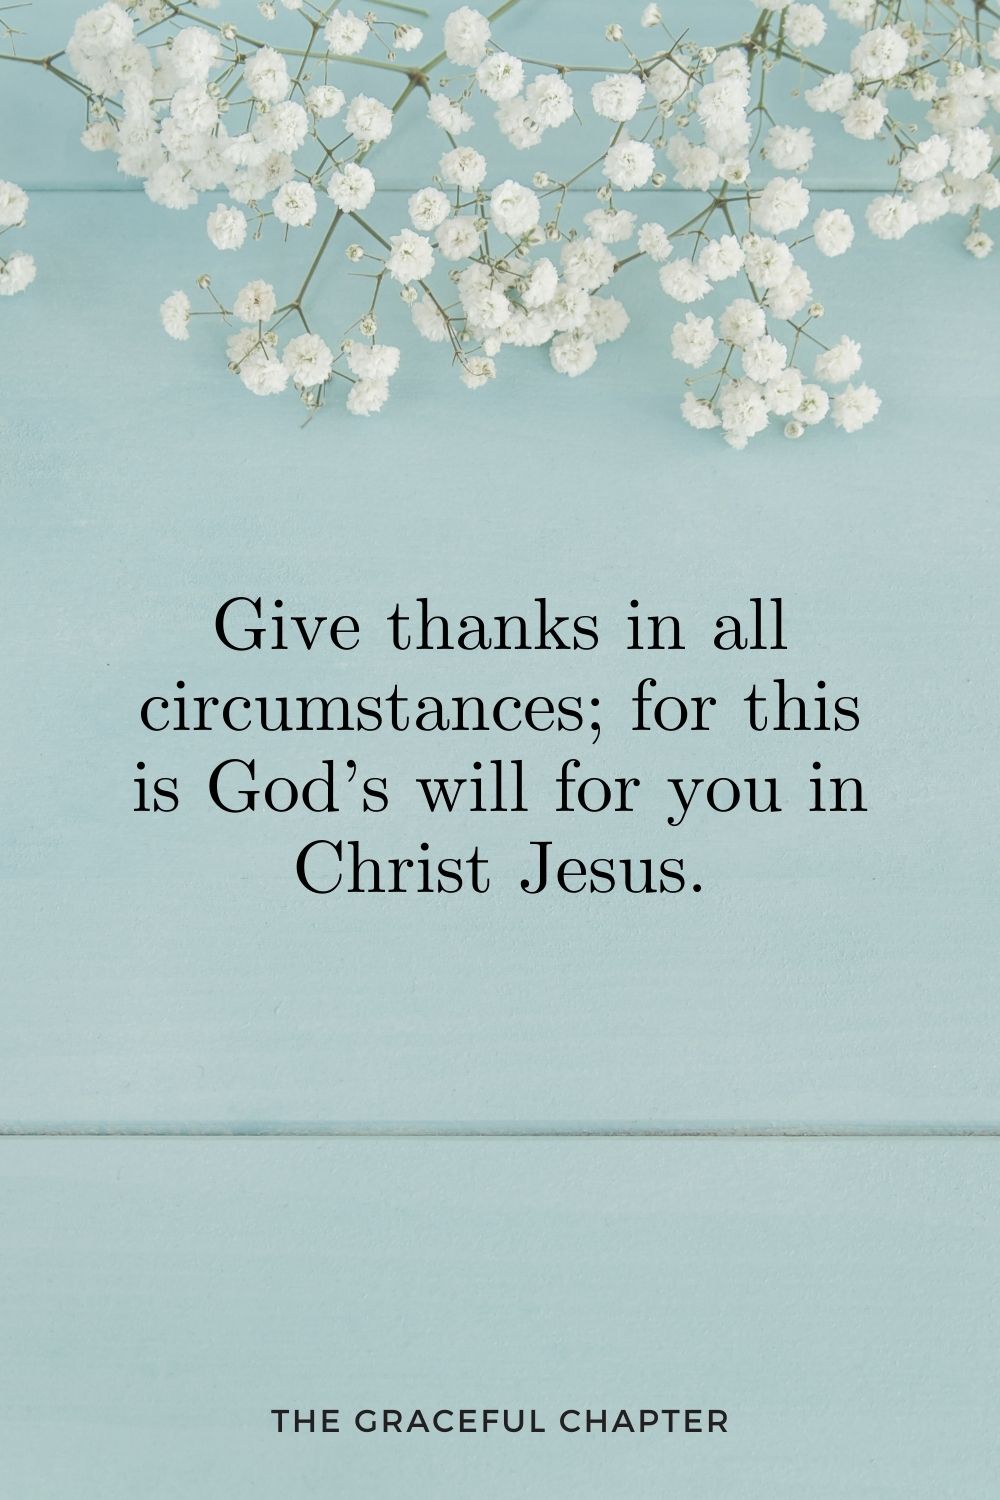 Give thanks in all circumstances; for this is God’s will for you in Christ Jesus. 1 Thessalonians 5:18